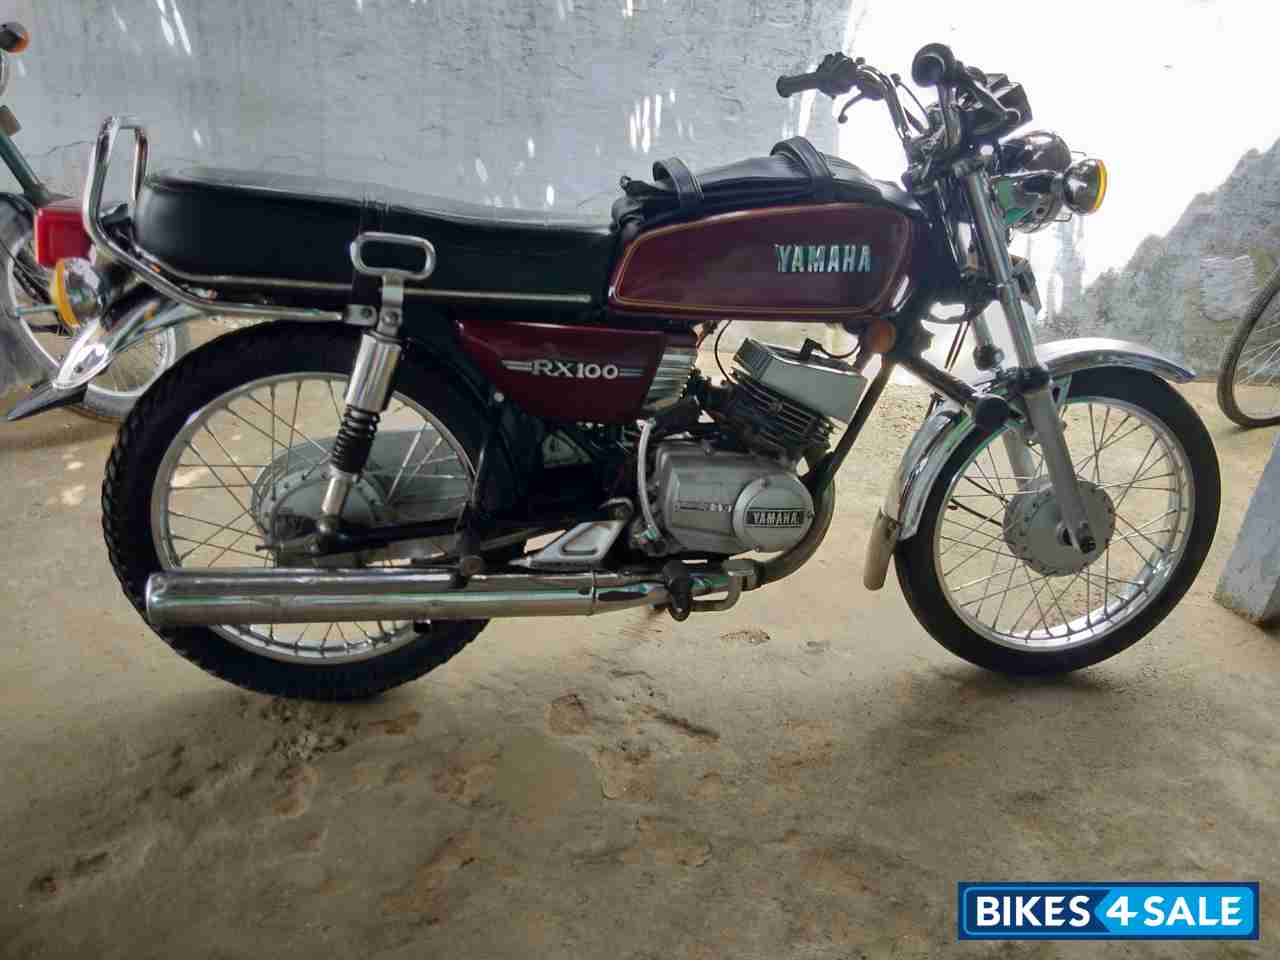 Used 1990 Model Yamaha Rx 100 For Sale In Coimbatore Id 201250